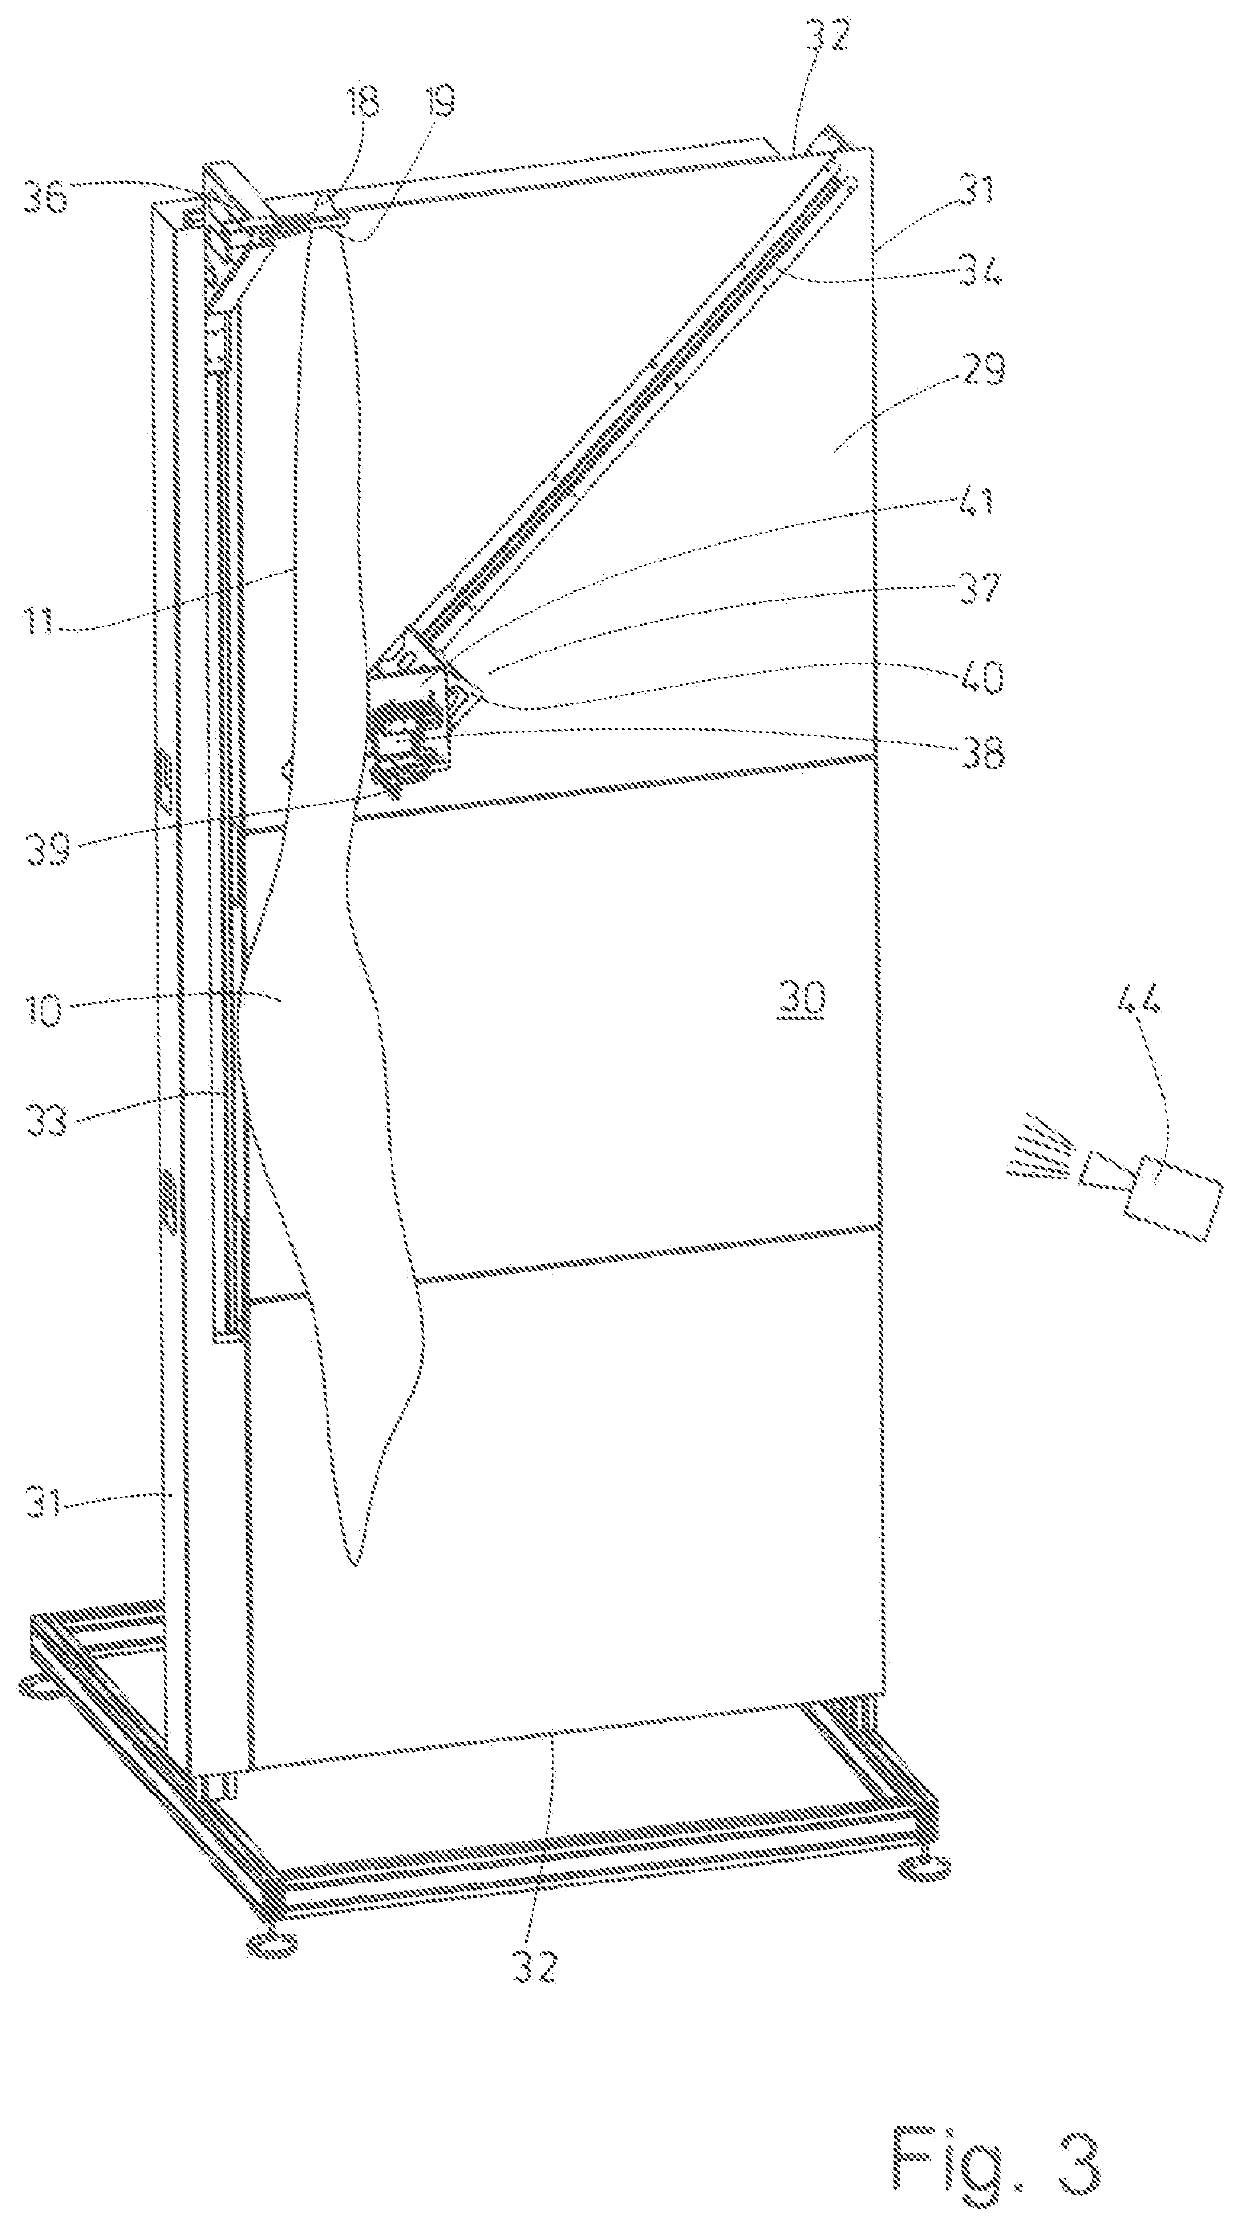 Method and device for gripping rectangular textile items and/or for feeding rectangular textile items to a treatment installation